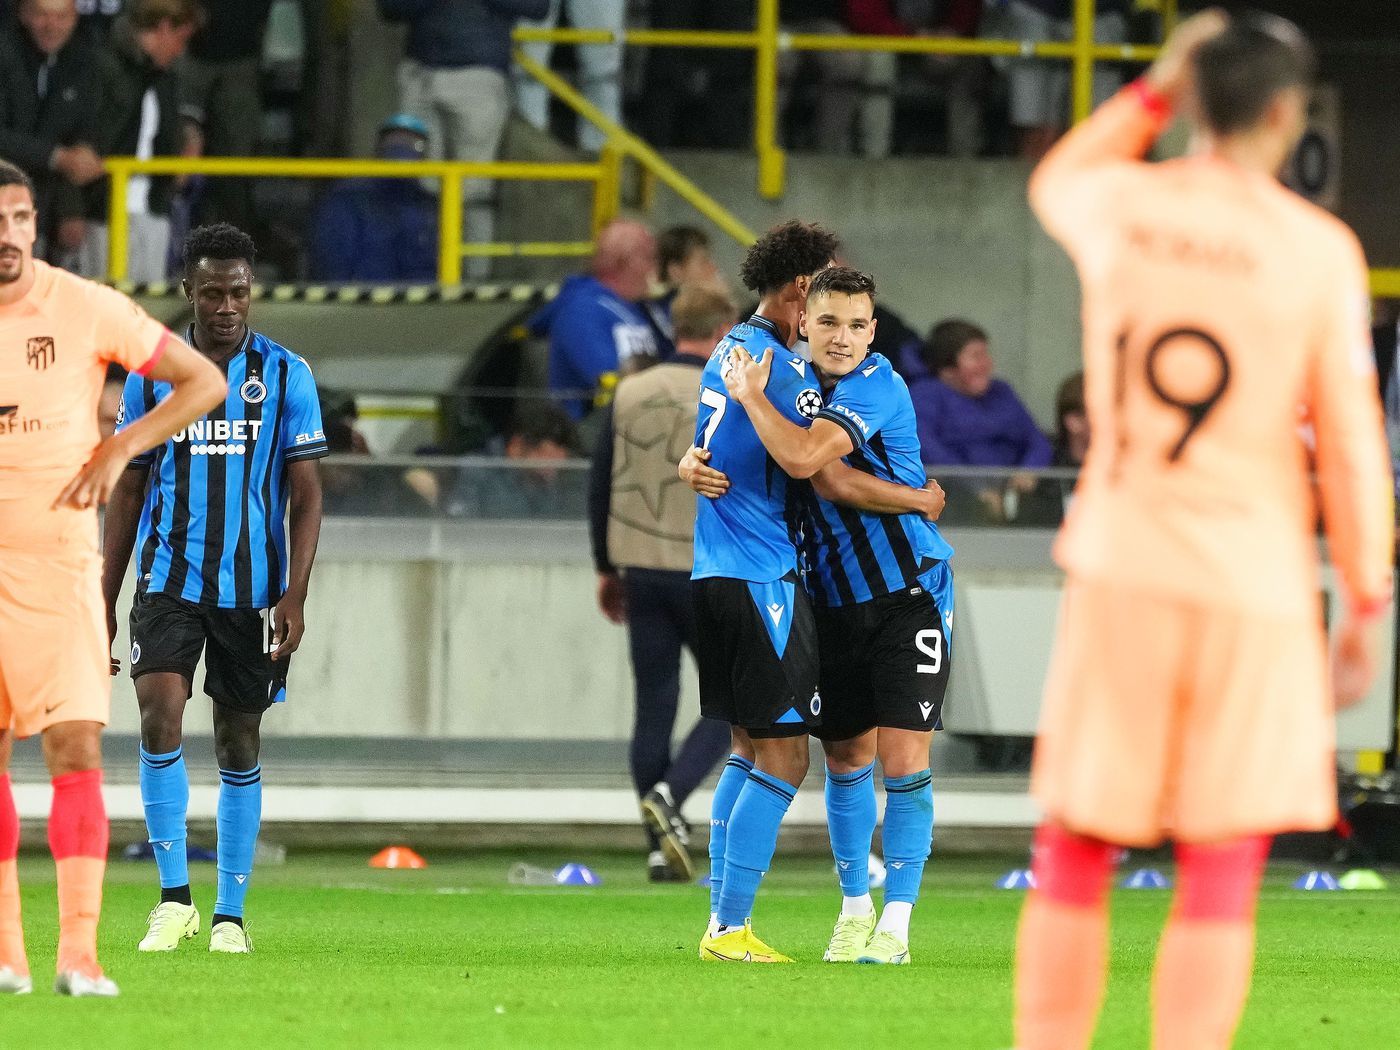 Brugge draws with Atletico in the Champions League and secures a playoff spot